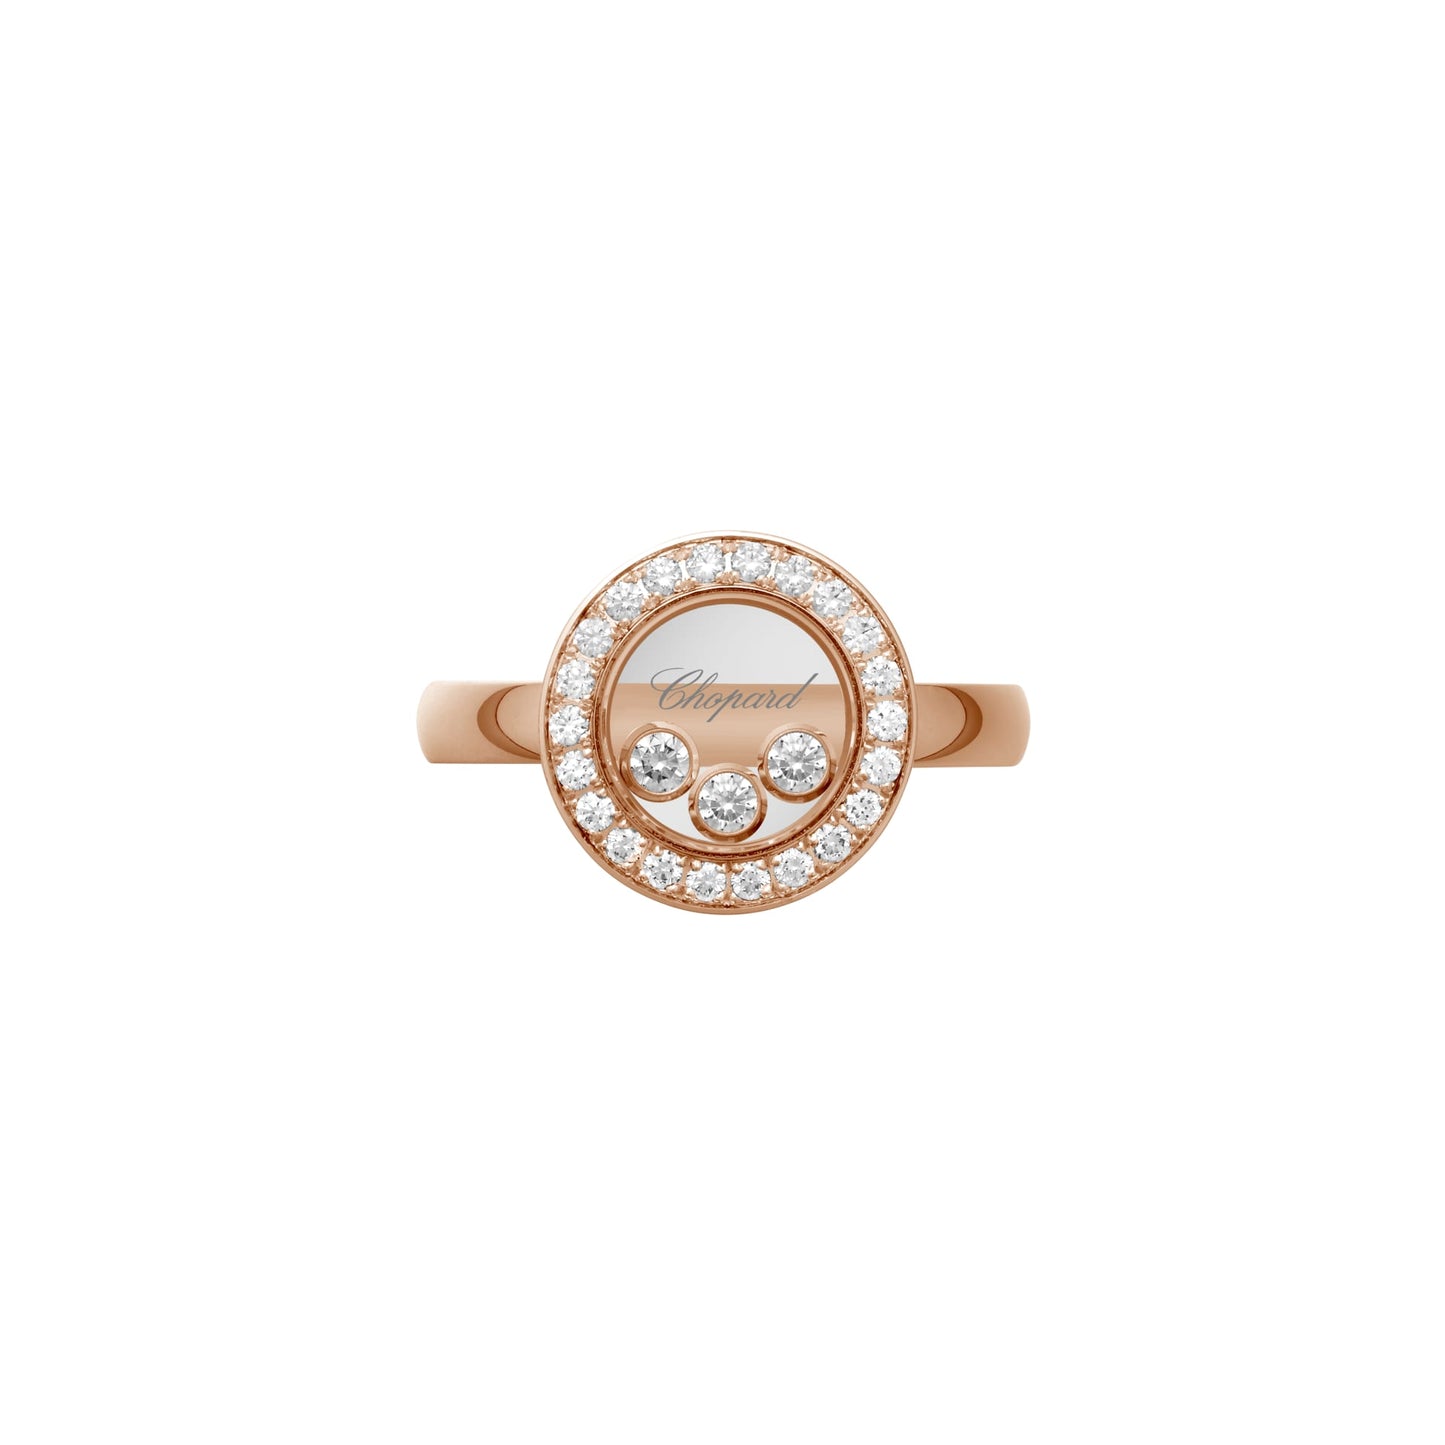 HAPPY DIAMONDS ICONS RING, ETHICAL ROSE GOLD, DIAMONDS 82A018-5200